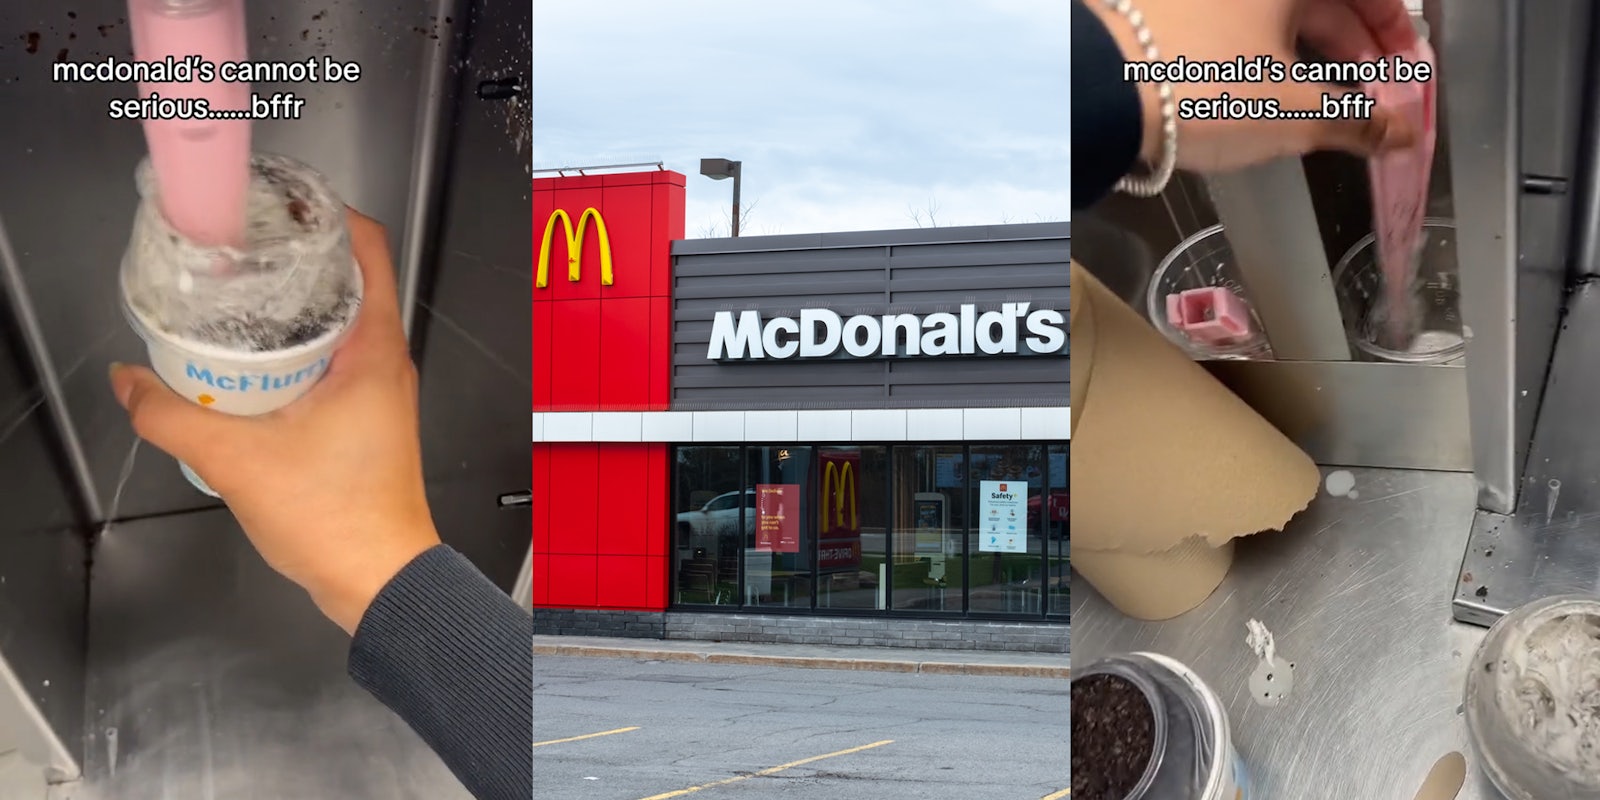 McDonald's worker making McFlurry with caption 'mcdonald's cannot be serious...bffr' (l) McDonald's signs on building (c) McDonald's worker making McFlurry putting reusable spoon back with caption 'mcdonald's cannot be serious...bffr' (r)